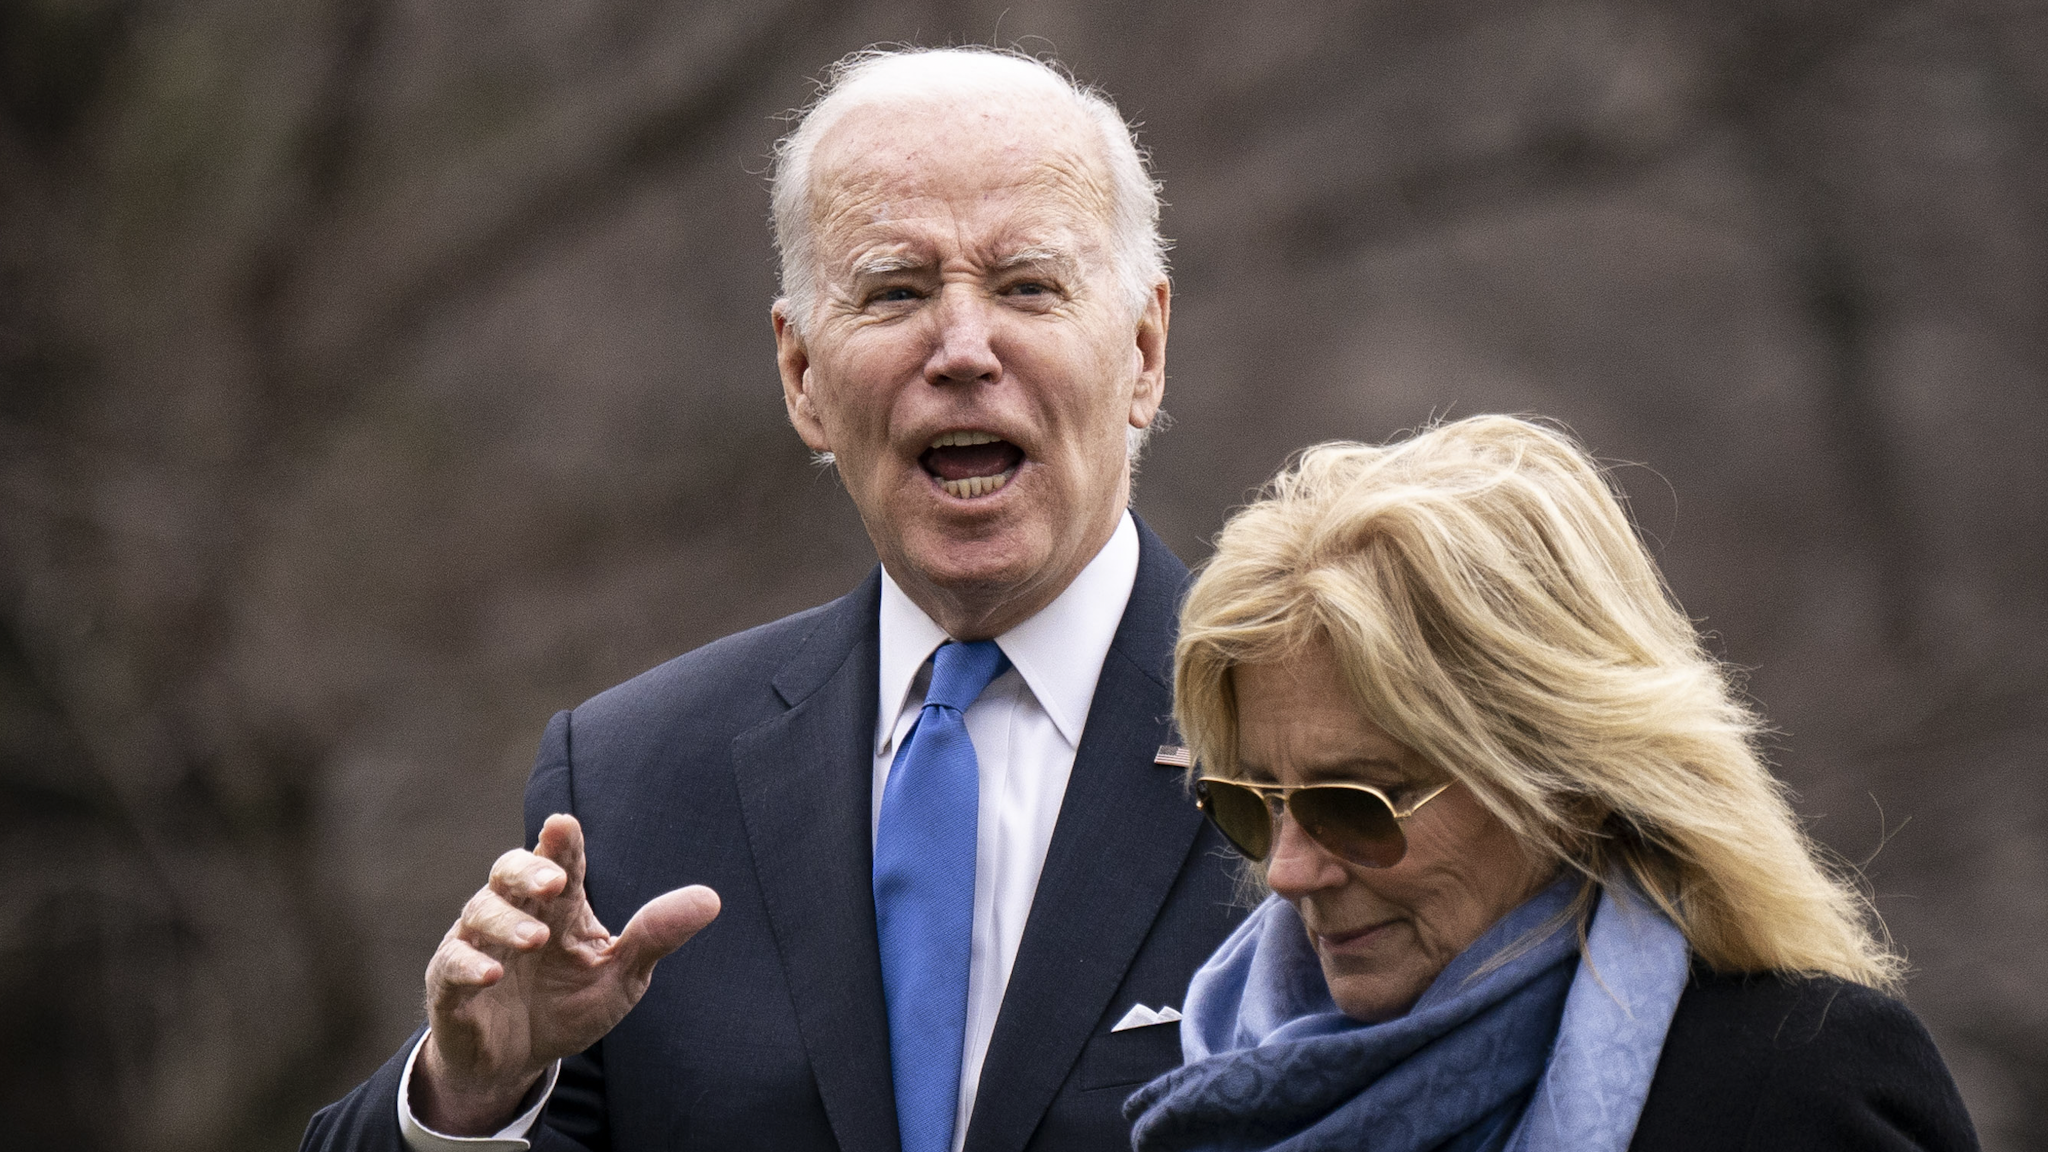 US President Joe Biden and First Lady Jill Biden, right, walk on the South Lawn of the White House in Washington, DC, US, on Monday, Jan. 23, 2023. The Justice Department found six items containing classified information during a Friday search of Biden's home in Wilmington, Delaware, his personal lawyers said on Saturday.